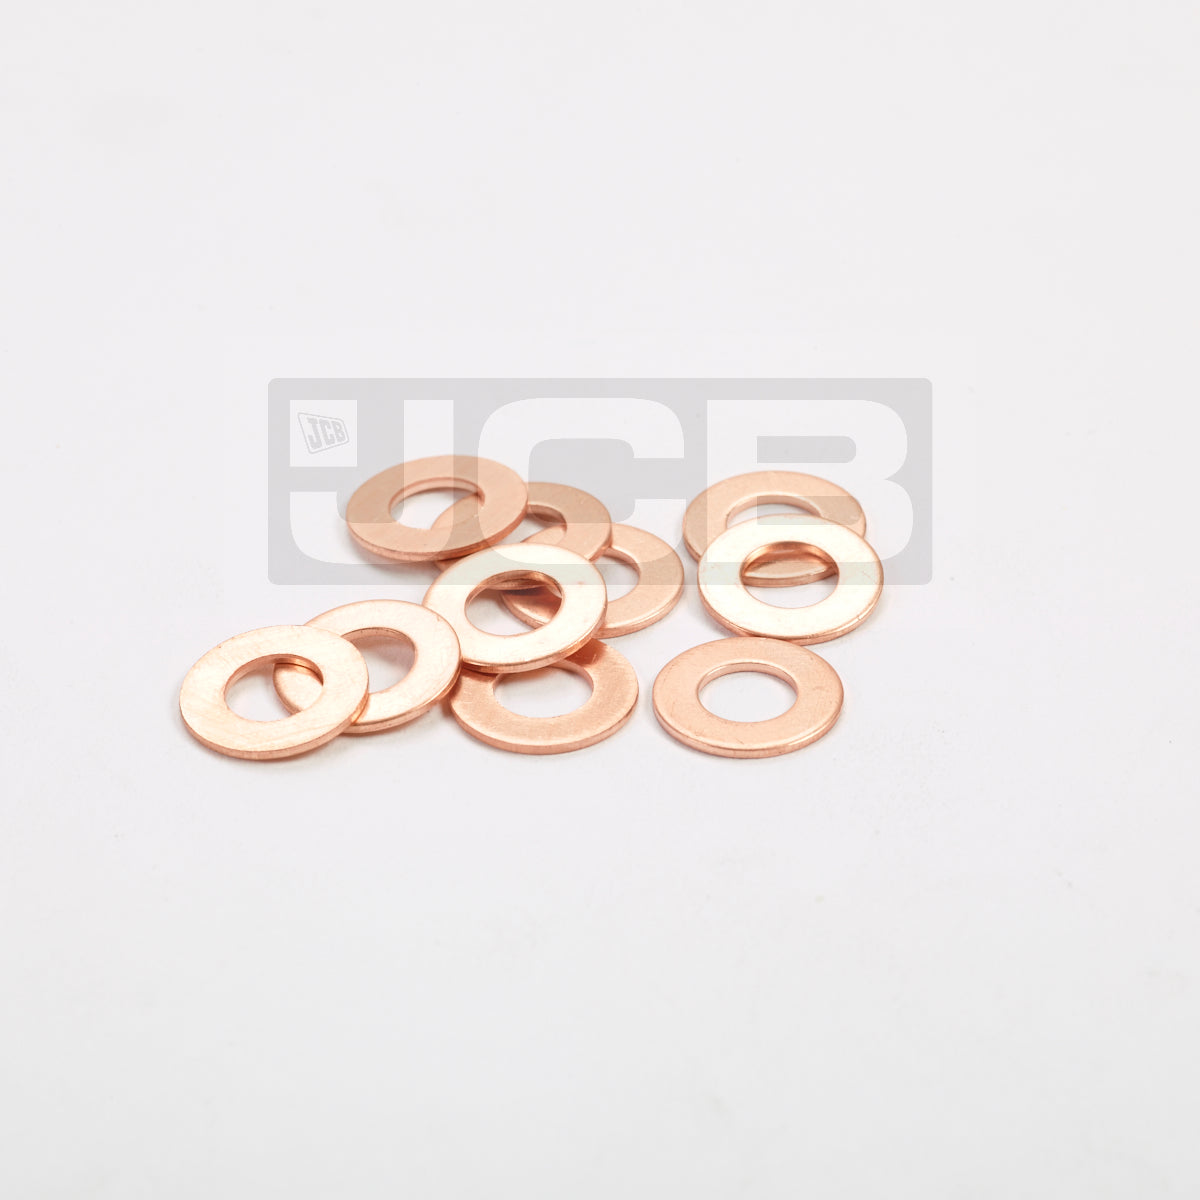 JCB Copper Washer : 823/00291 (Pack of 10)